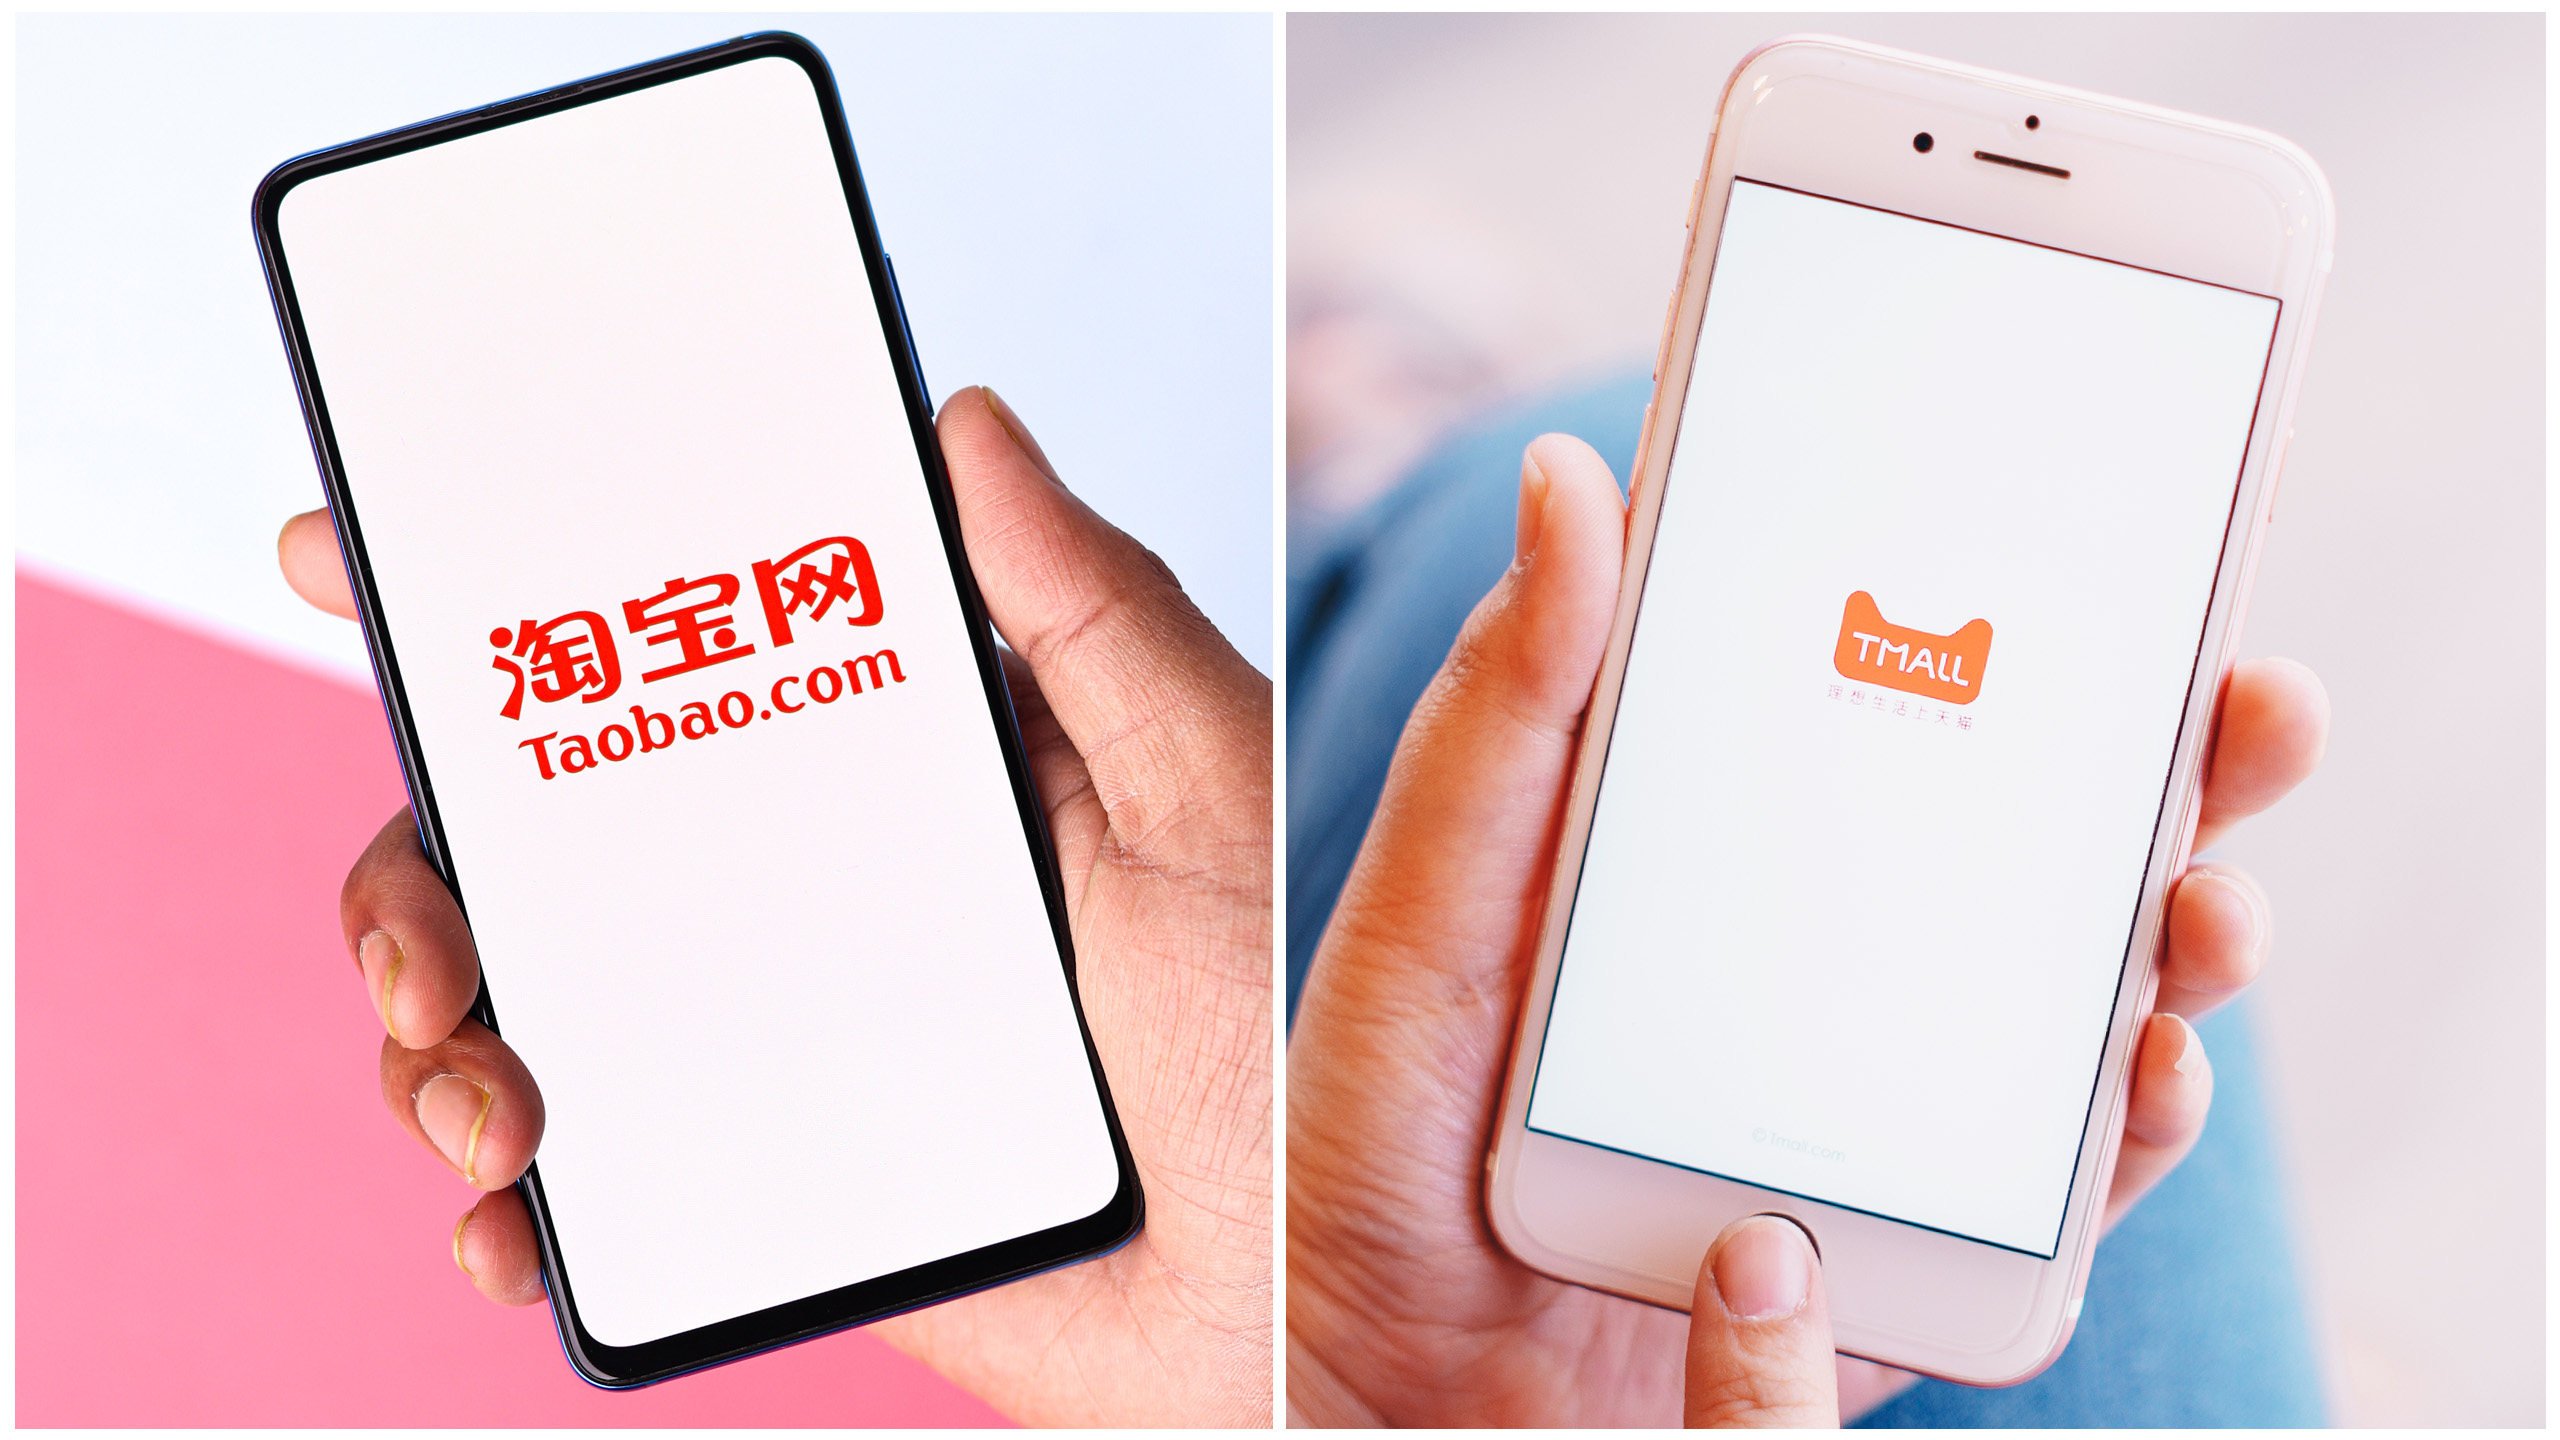 The executive reshuffle at Taobao and Tmall Group shows how Alibaba Group Holding is adhering to calls made by company co-founder Jack Ma to “give more power” to young people. Photos; Shutterstock